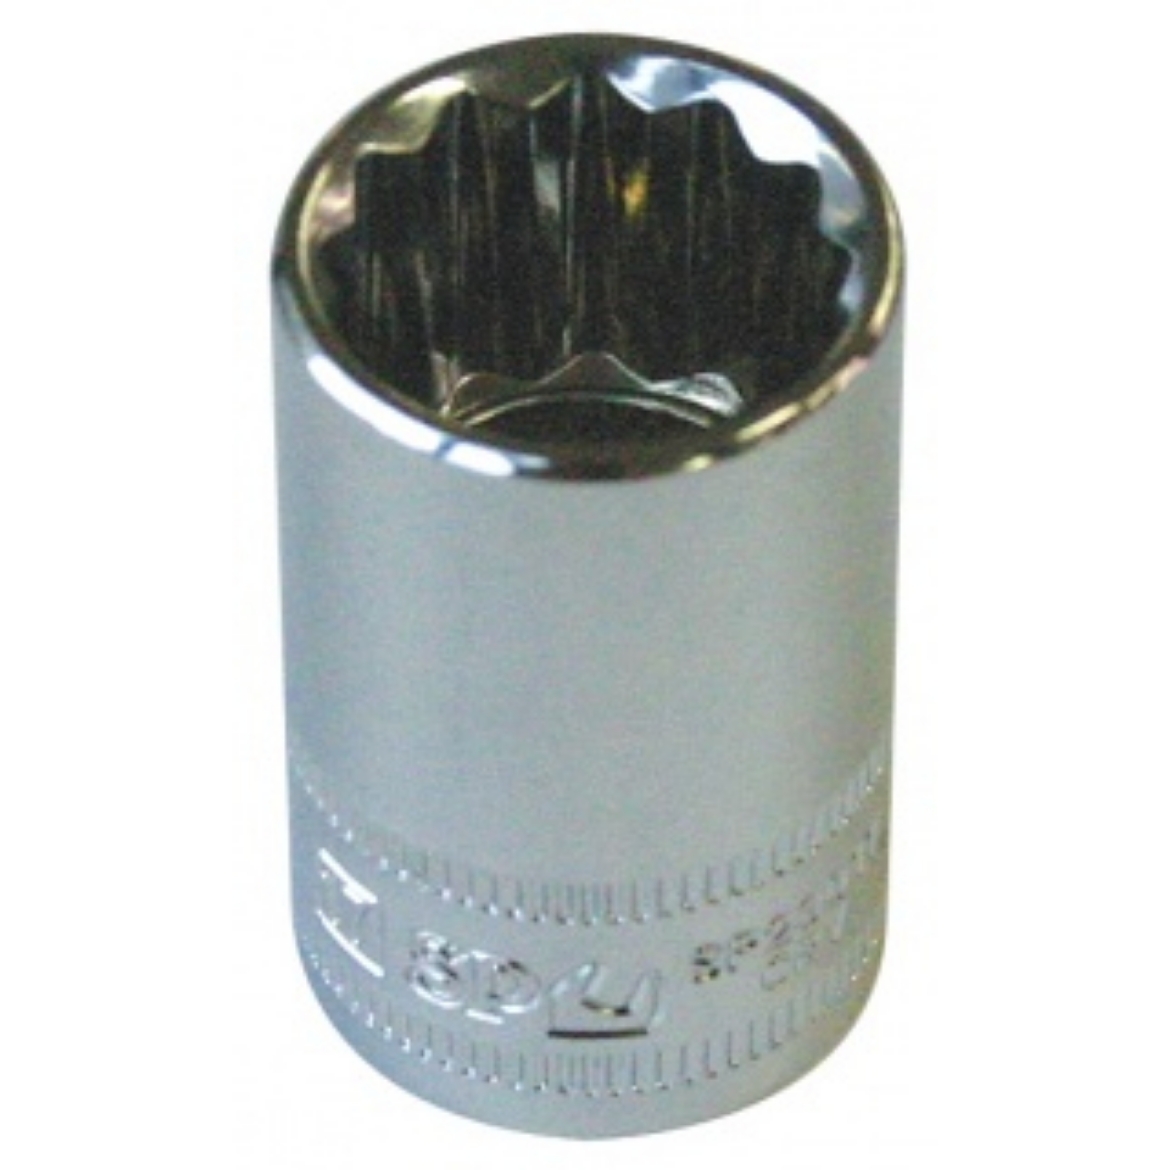 Picture of SOCKET 1/2"DR 12PT METRIC 10MM SP TOOLS